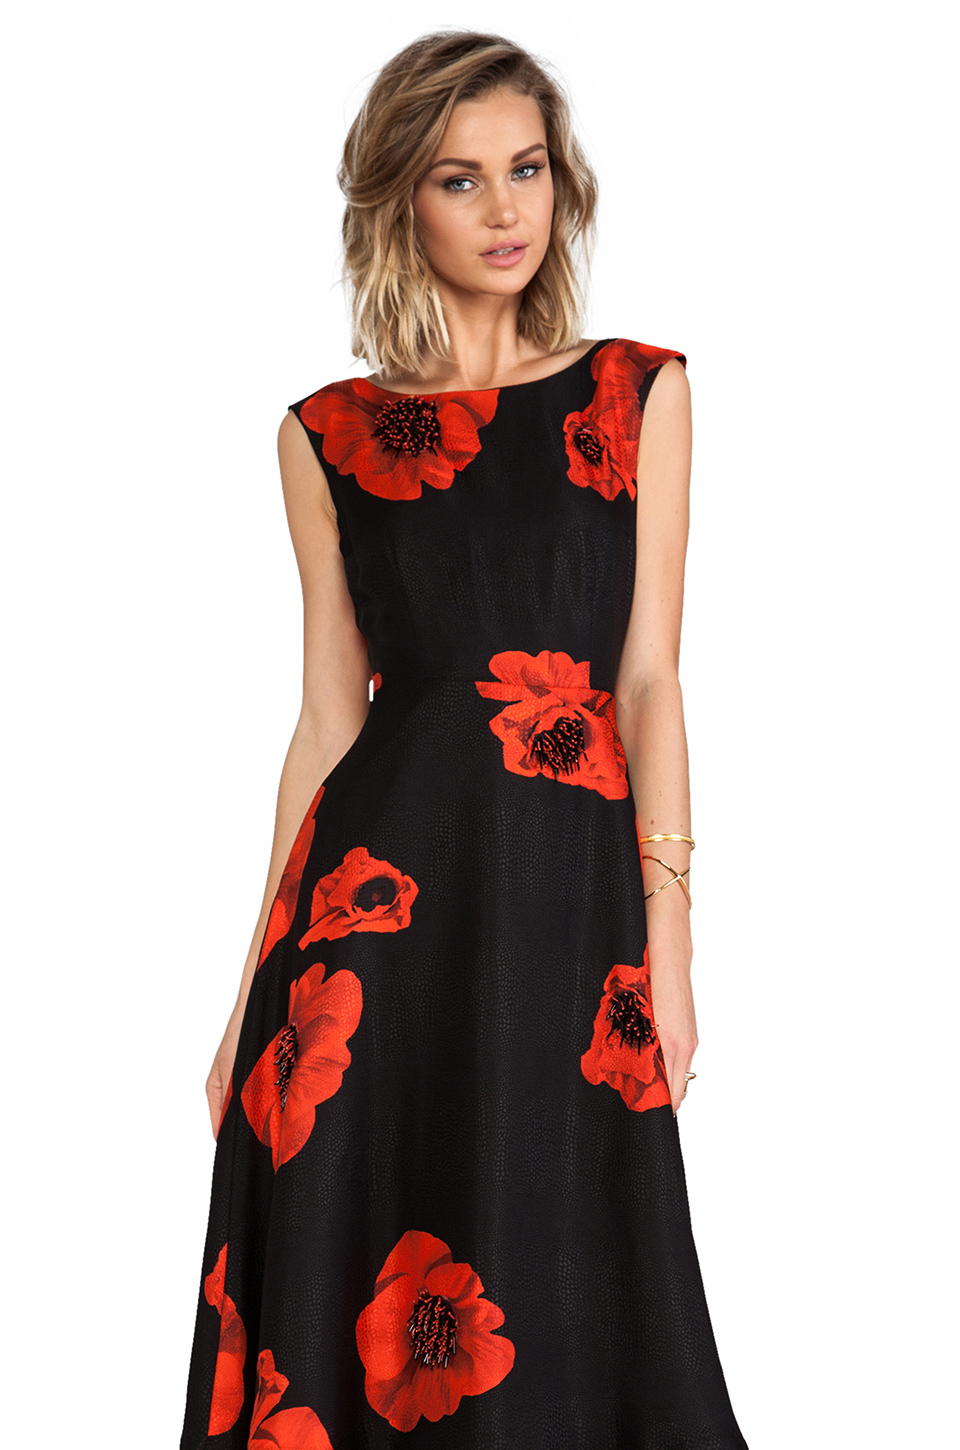 Lyst - Tracy Reese Scarlet Floral Embellished Flared Frock in Black in ...